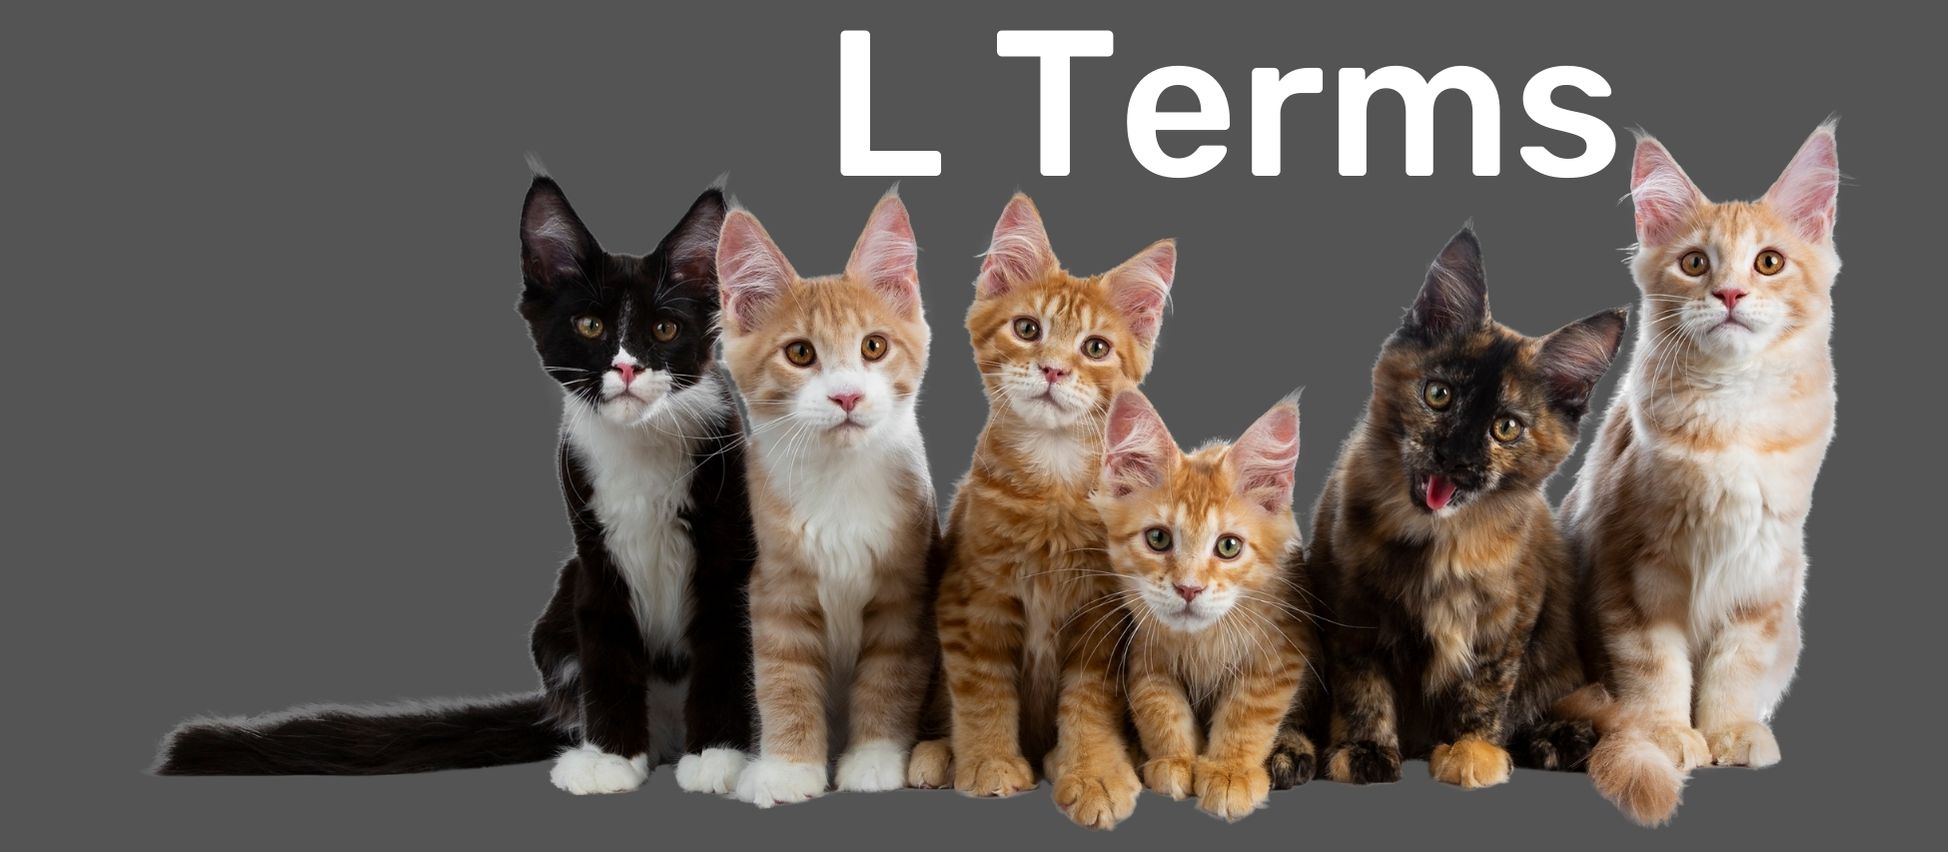 Group of six cats in front of a gray background with text reading 'L Terms' at the top to indicate a new section of the glossary